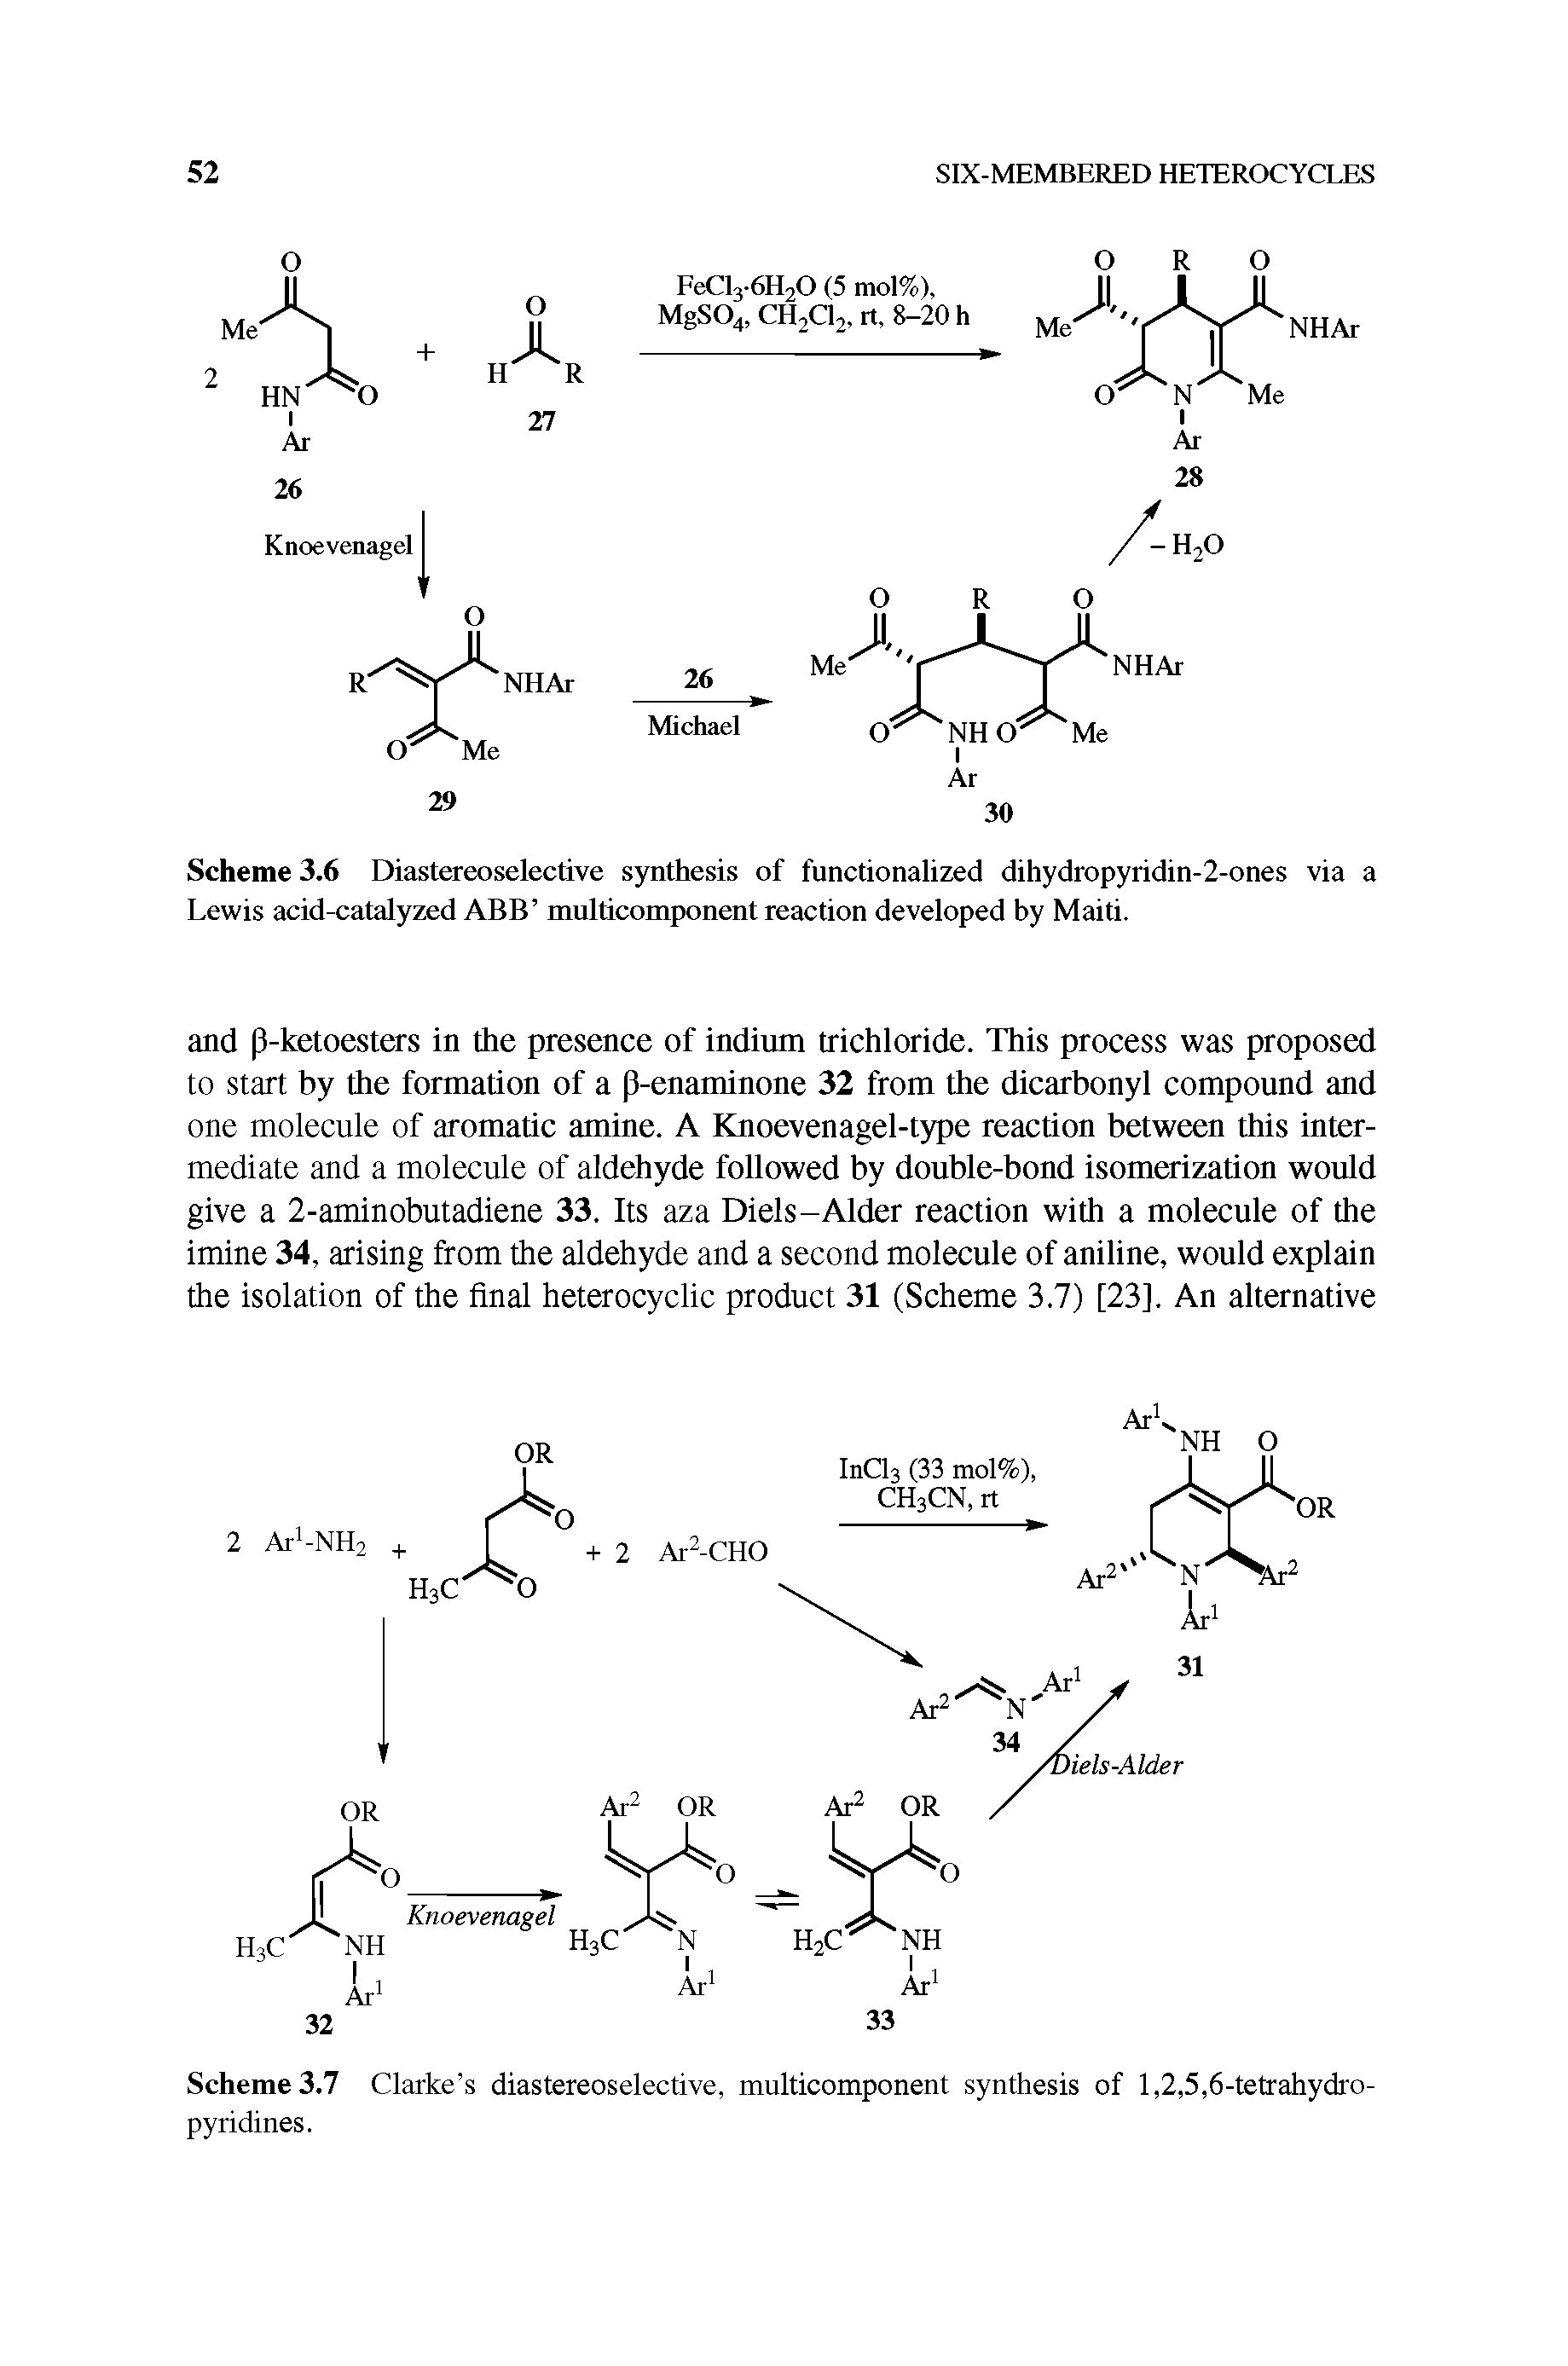 Scheme 3.6 Diastereoselective synthesis of functionalized dihydropyridin-2-ones via a Lewis acid-catalyzed ABB multicomponent reaction developed by Maiti.